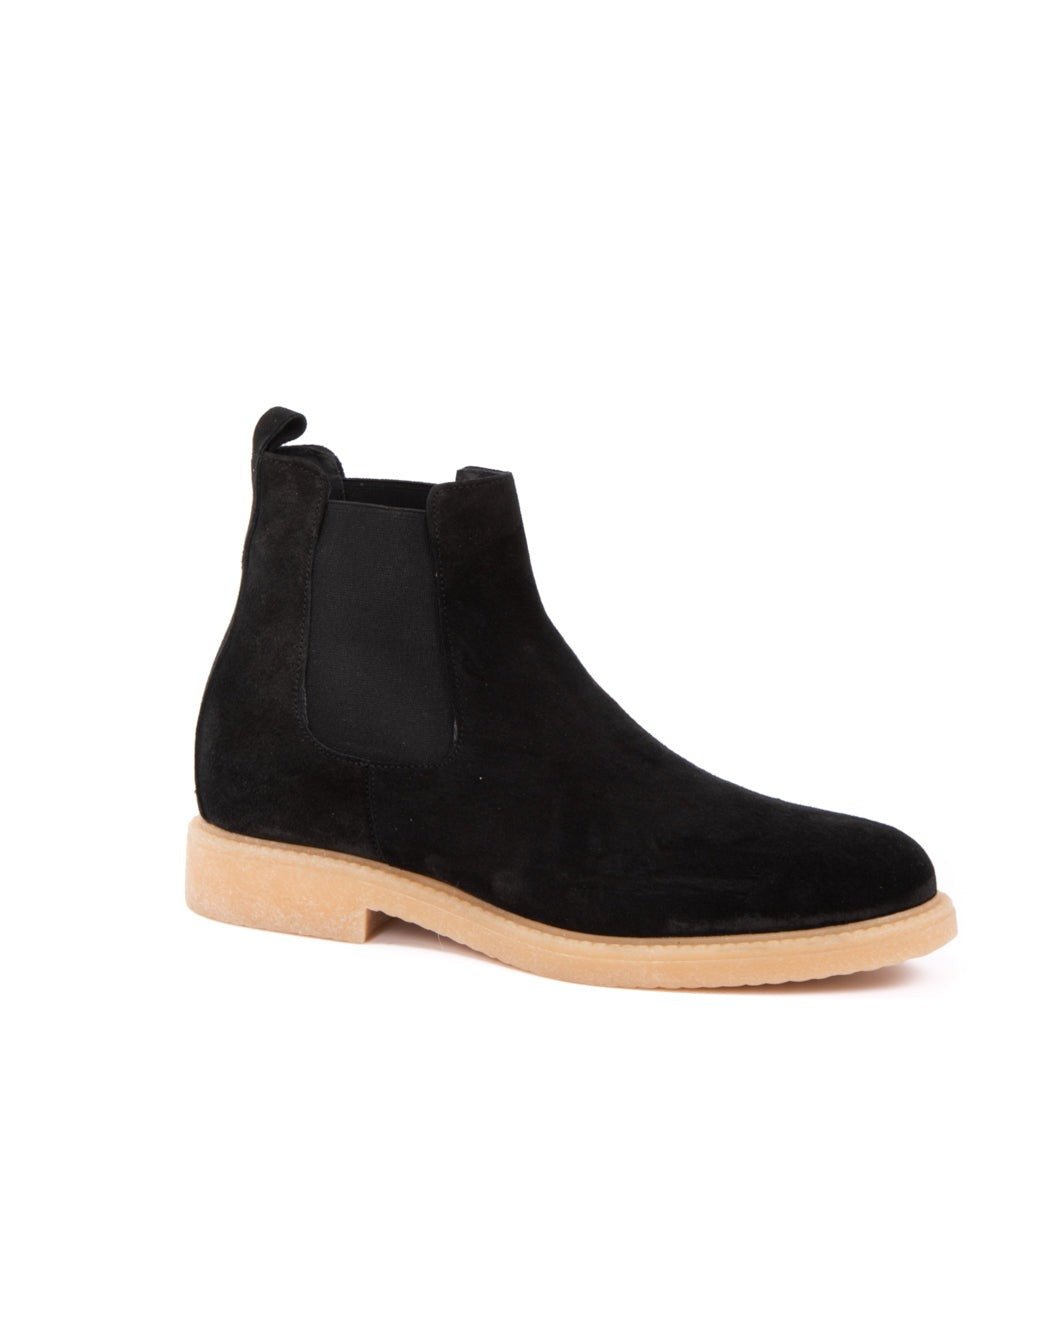 Eagle - crepe bottom ankle boot in black suede